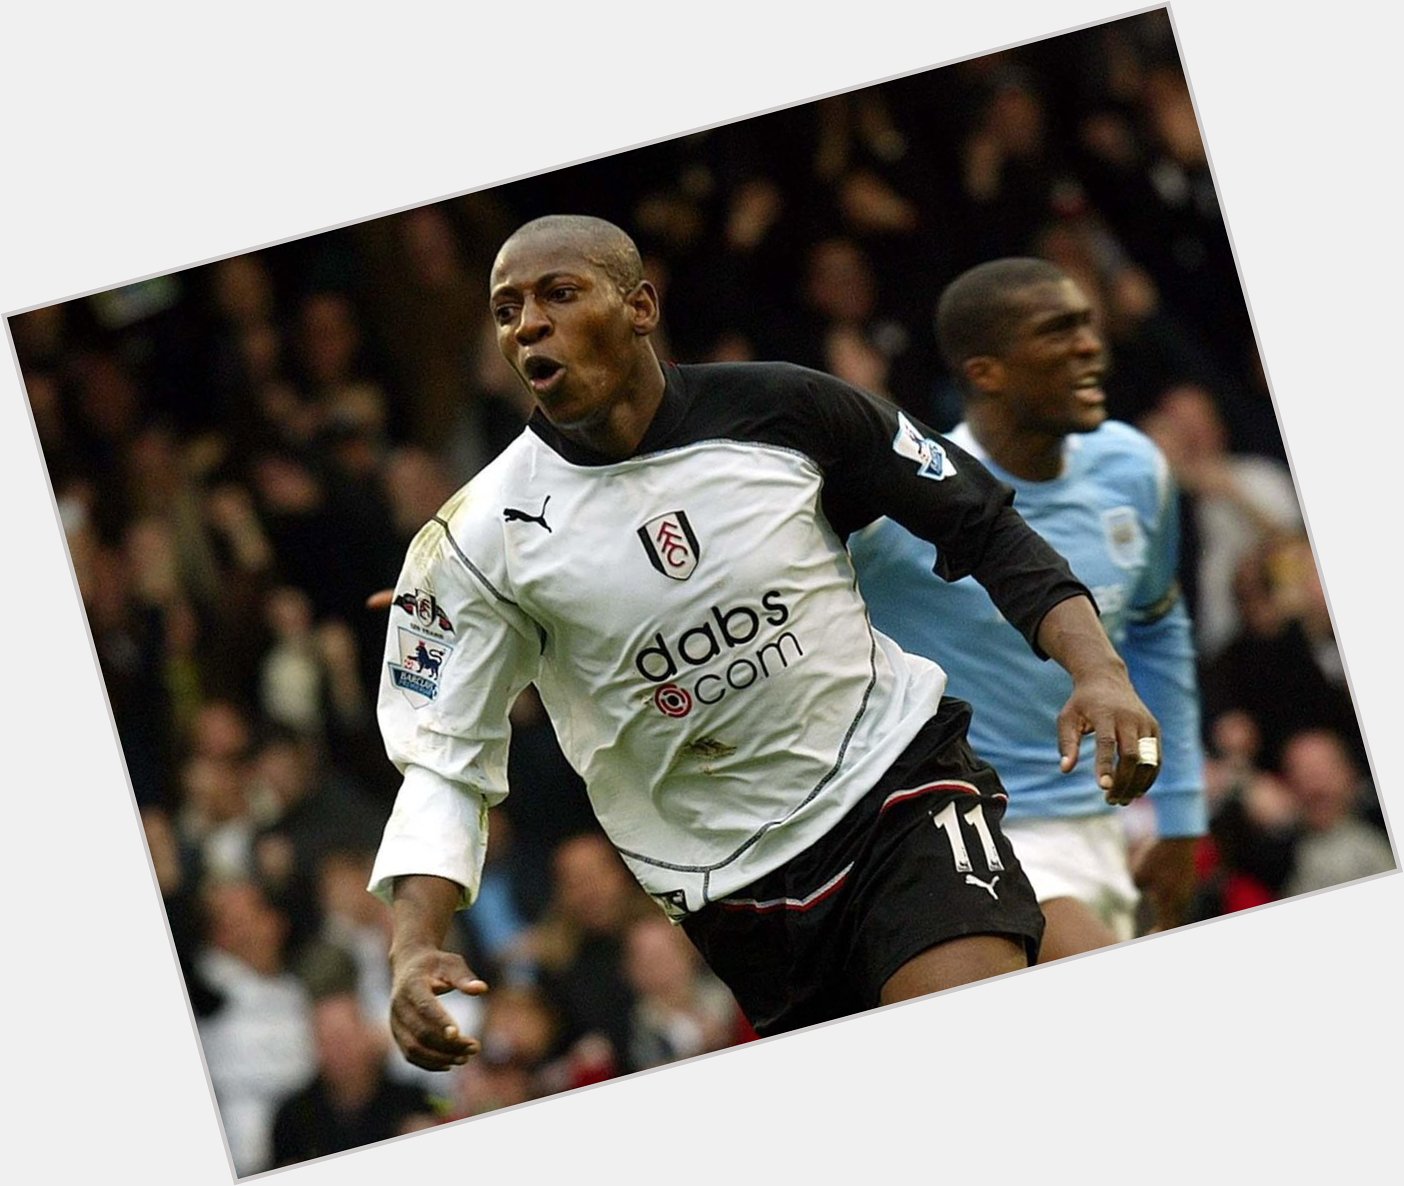  Happy Birthday to Luis Boa Morte

He was some player in his prime!  